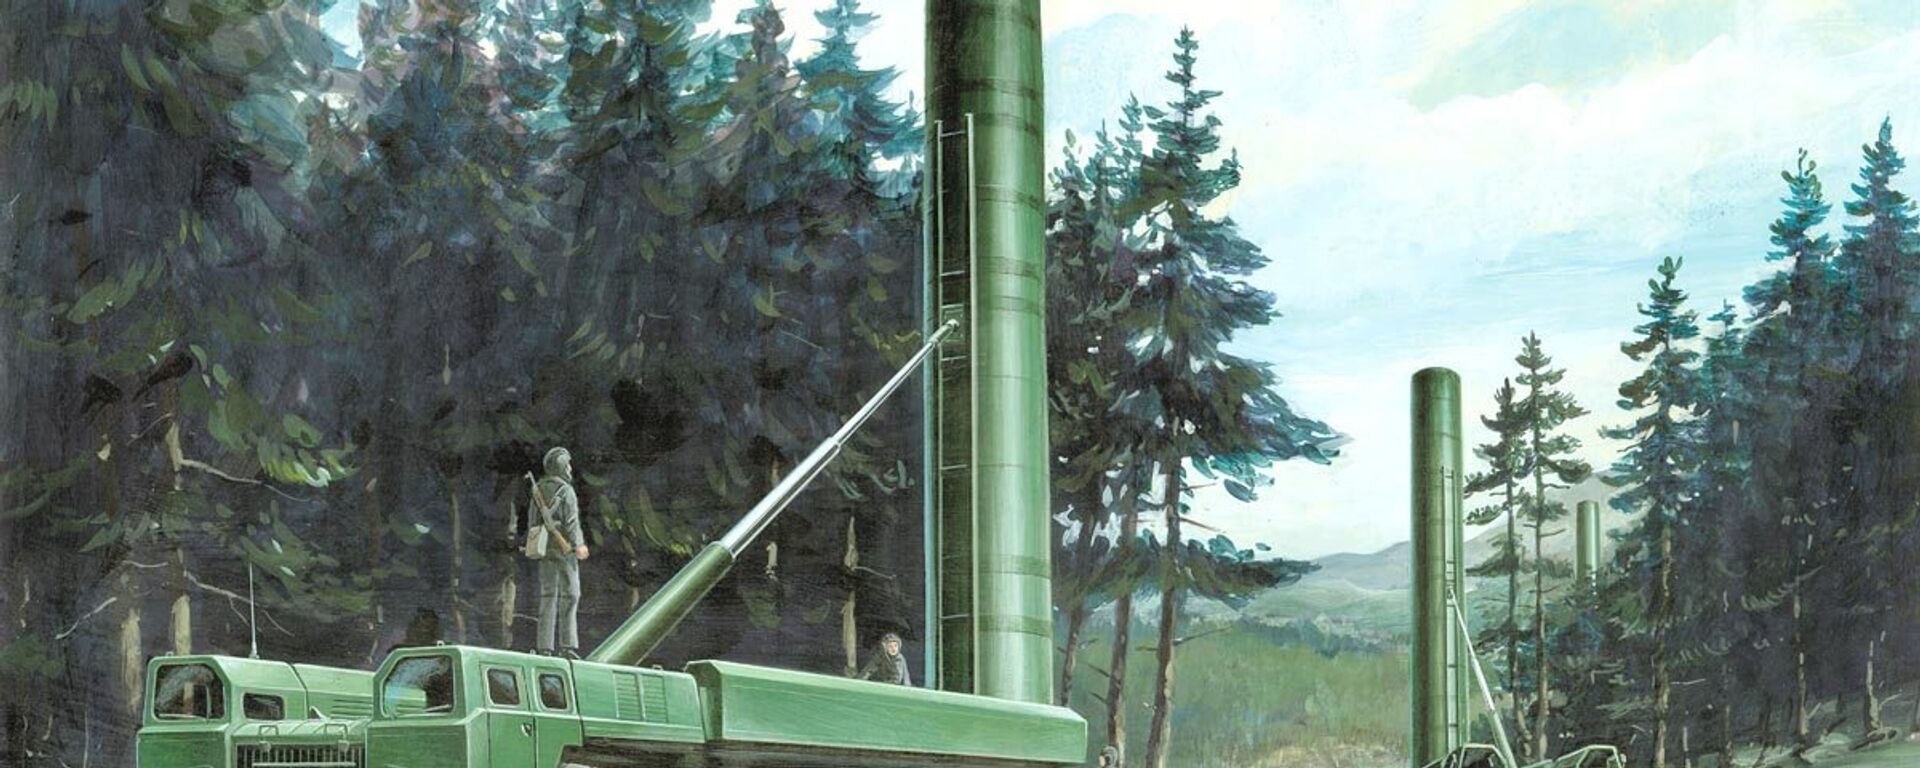 A Soviet SS-20 intermediate range missile launcher as envisioned in a US Defence Intelligence Agency report in the 1980s. - Sputnik International, 1920, 10.12.2021